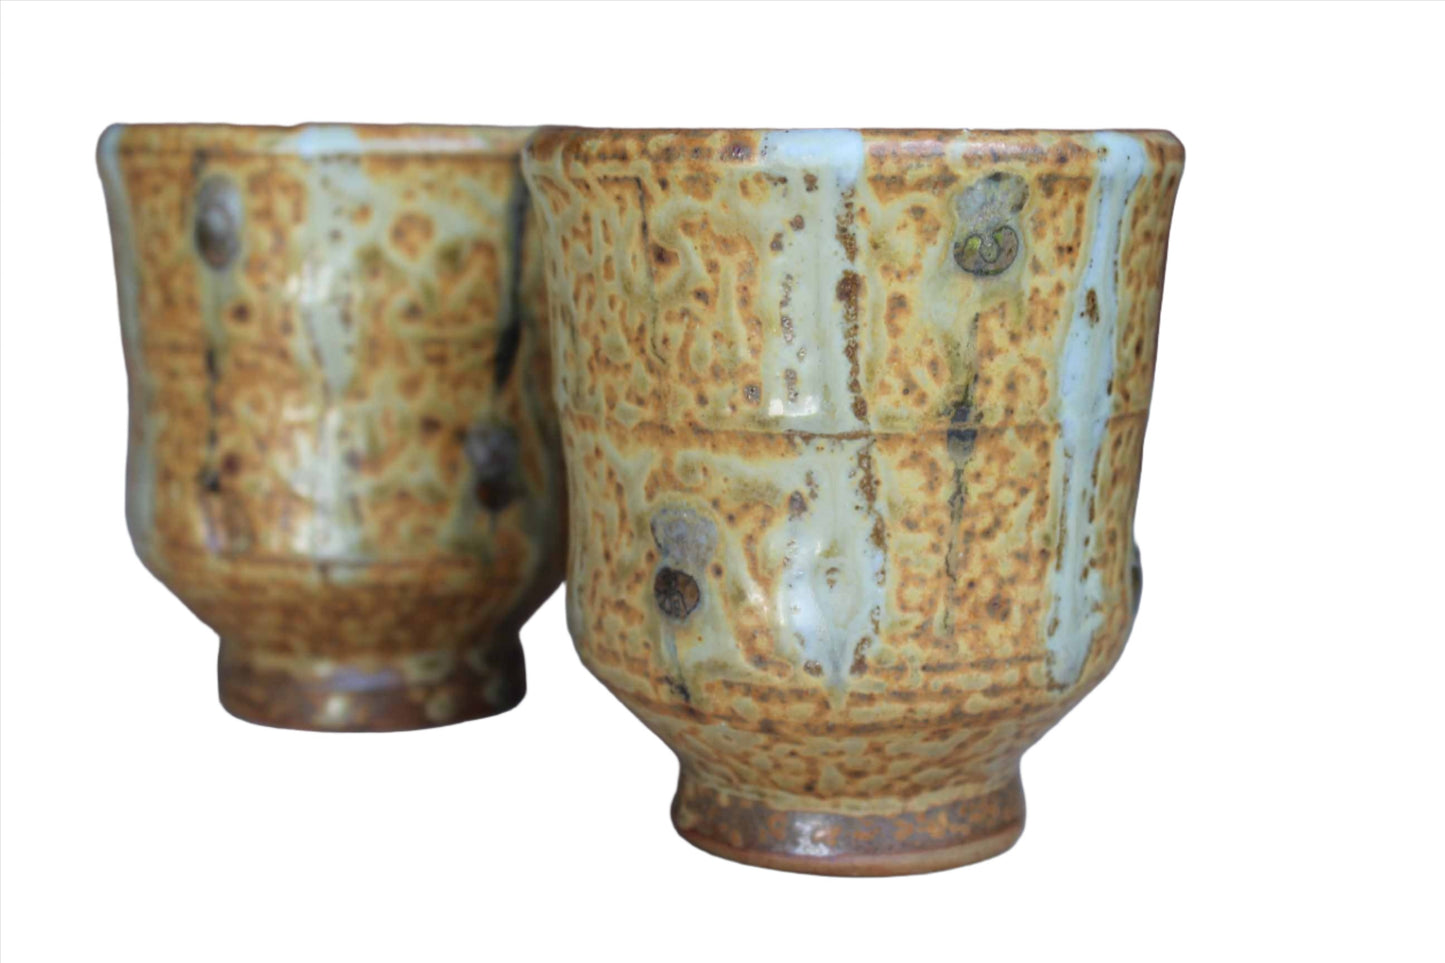 Handmade Stoneware Cups or Little Vases with Textured Green and Ochre Glazes